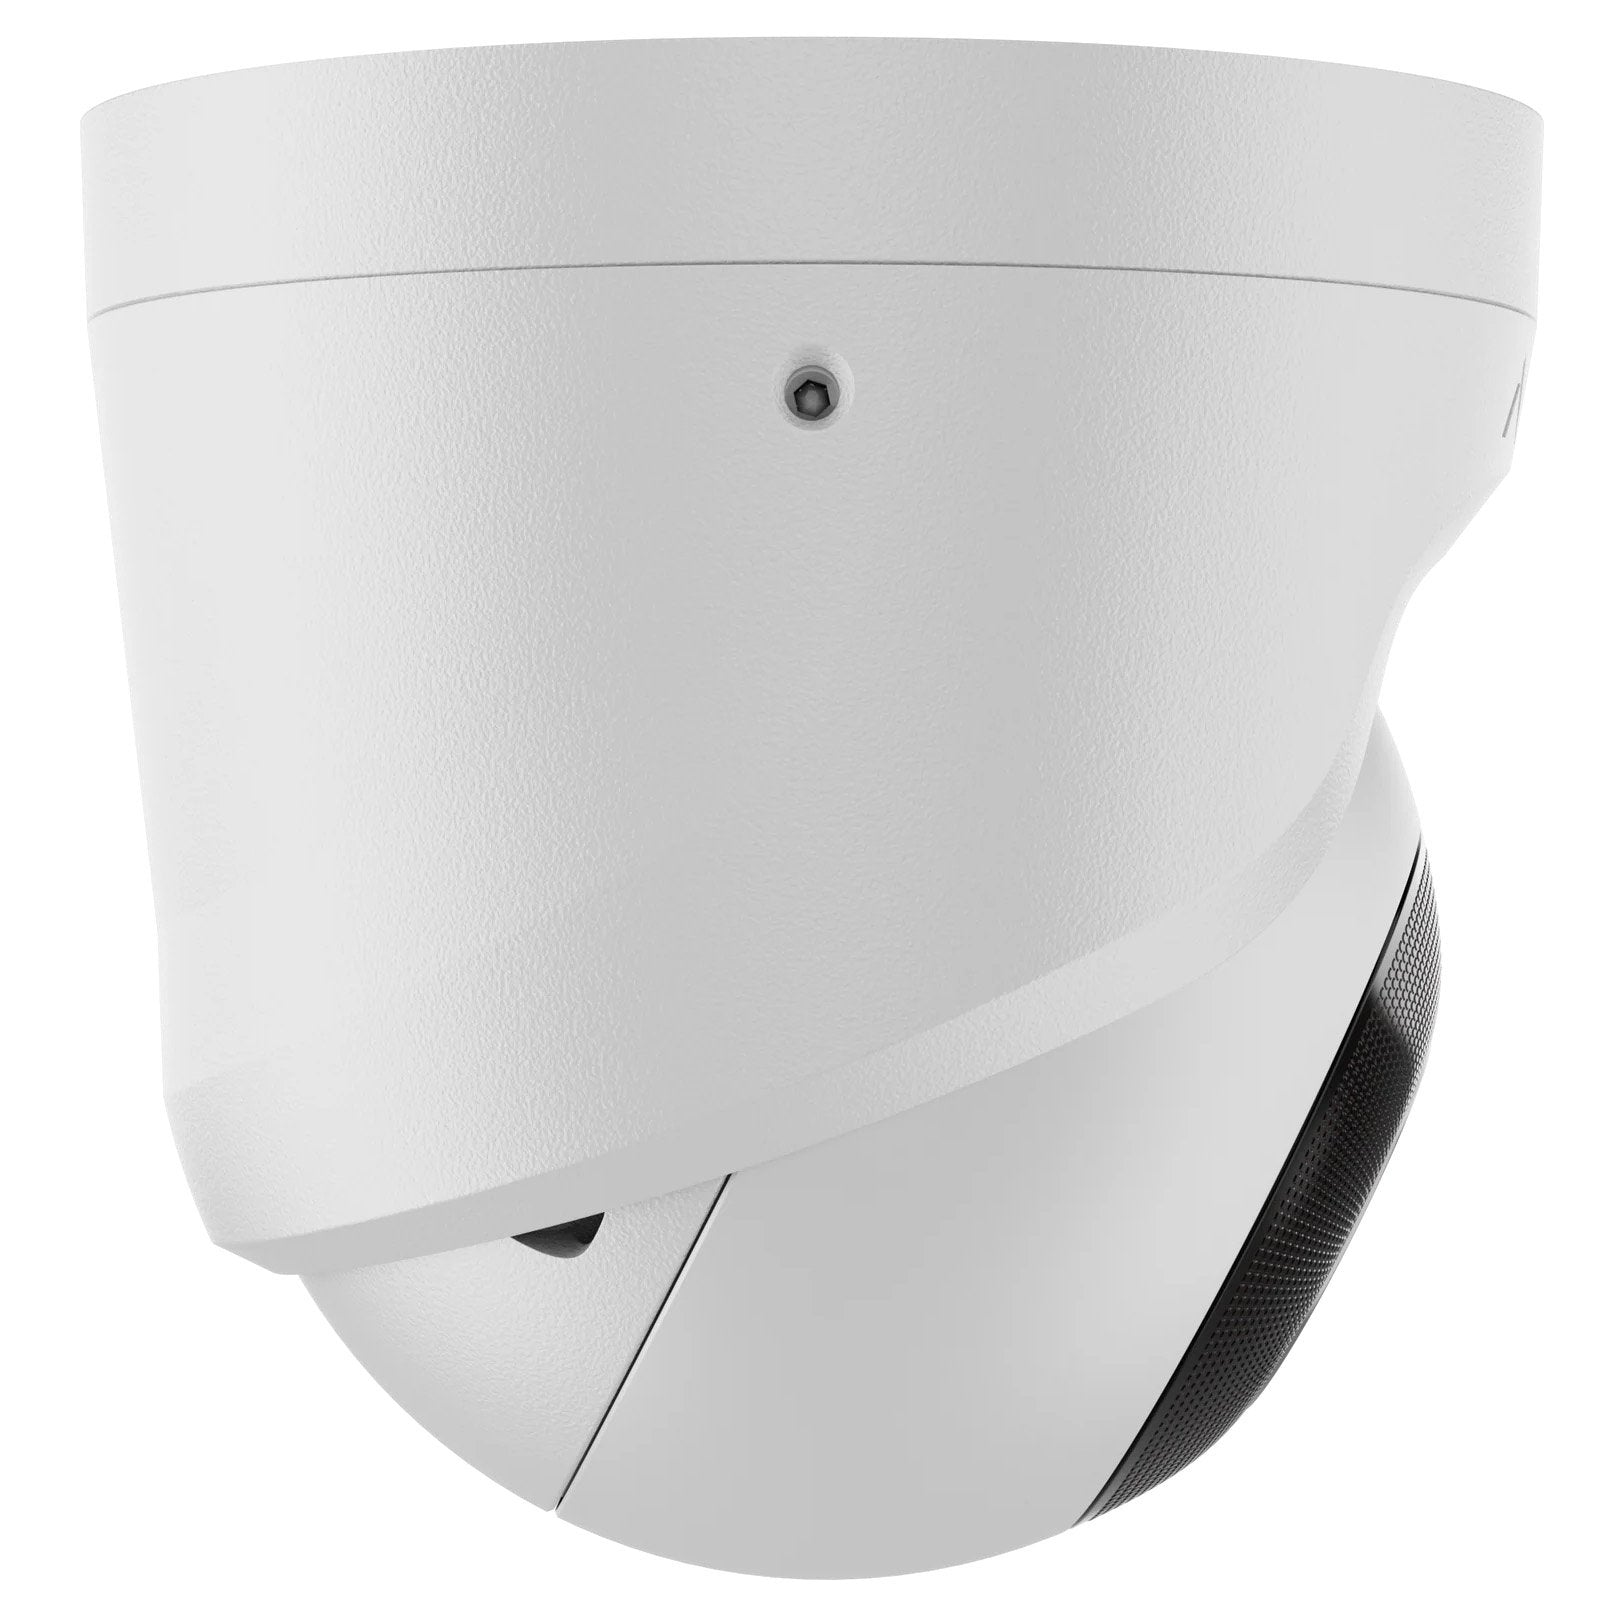 Ajax 8MP IP Baseline AI Series IR Turret Camera, AI-Powered Object Recognition, 2.8mm, 120dB WDR, 35m IR, POE / 12VDC, IP65, MicroSD, Built-in Mic